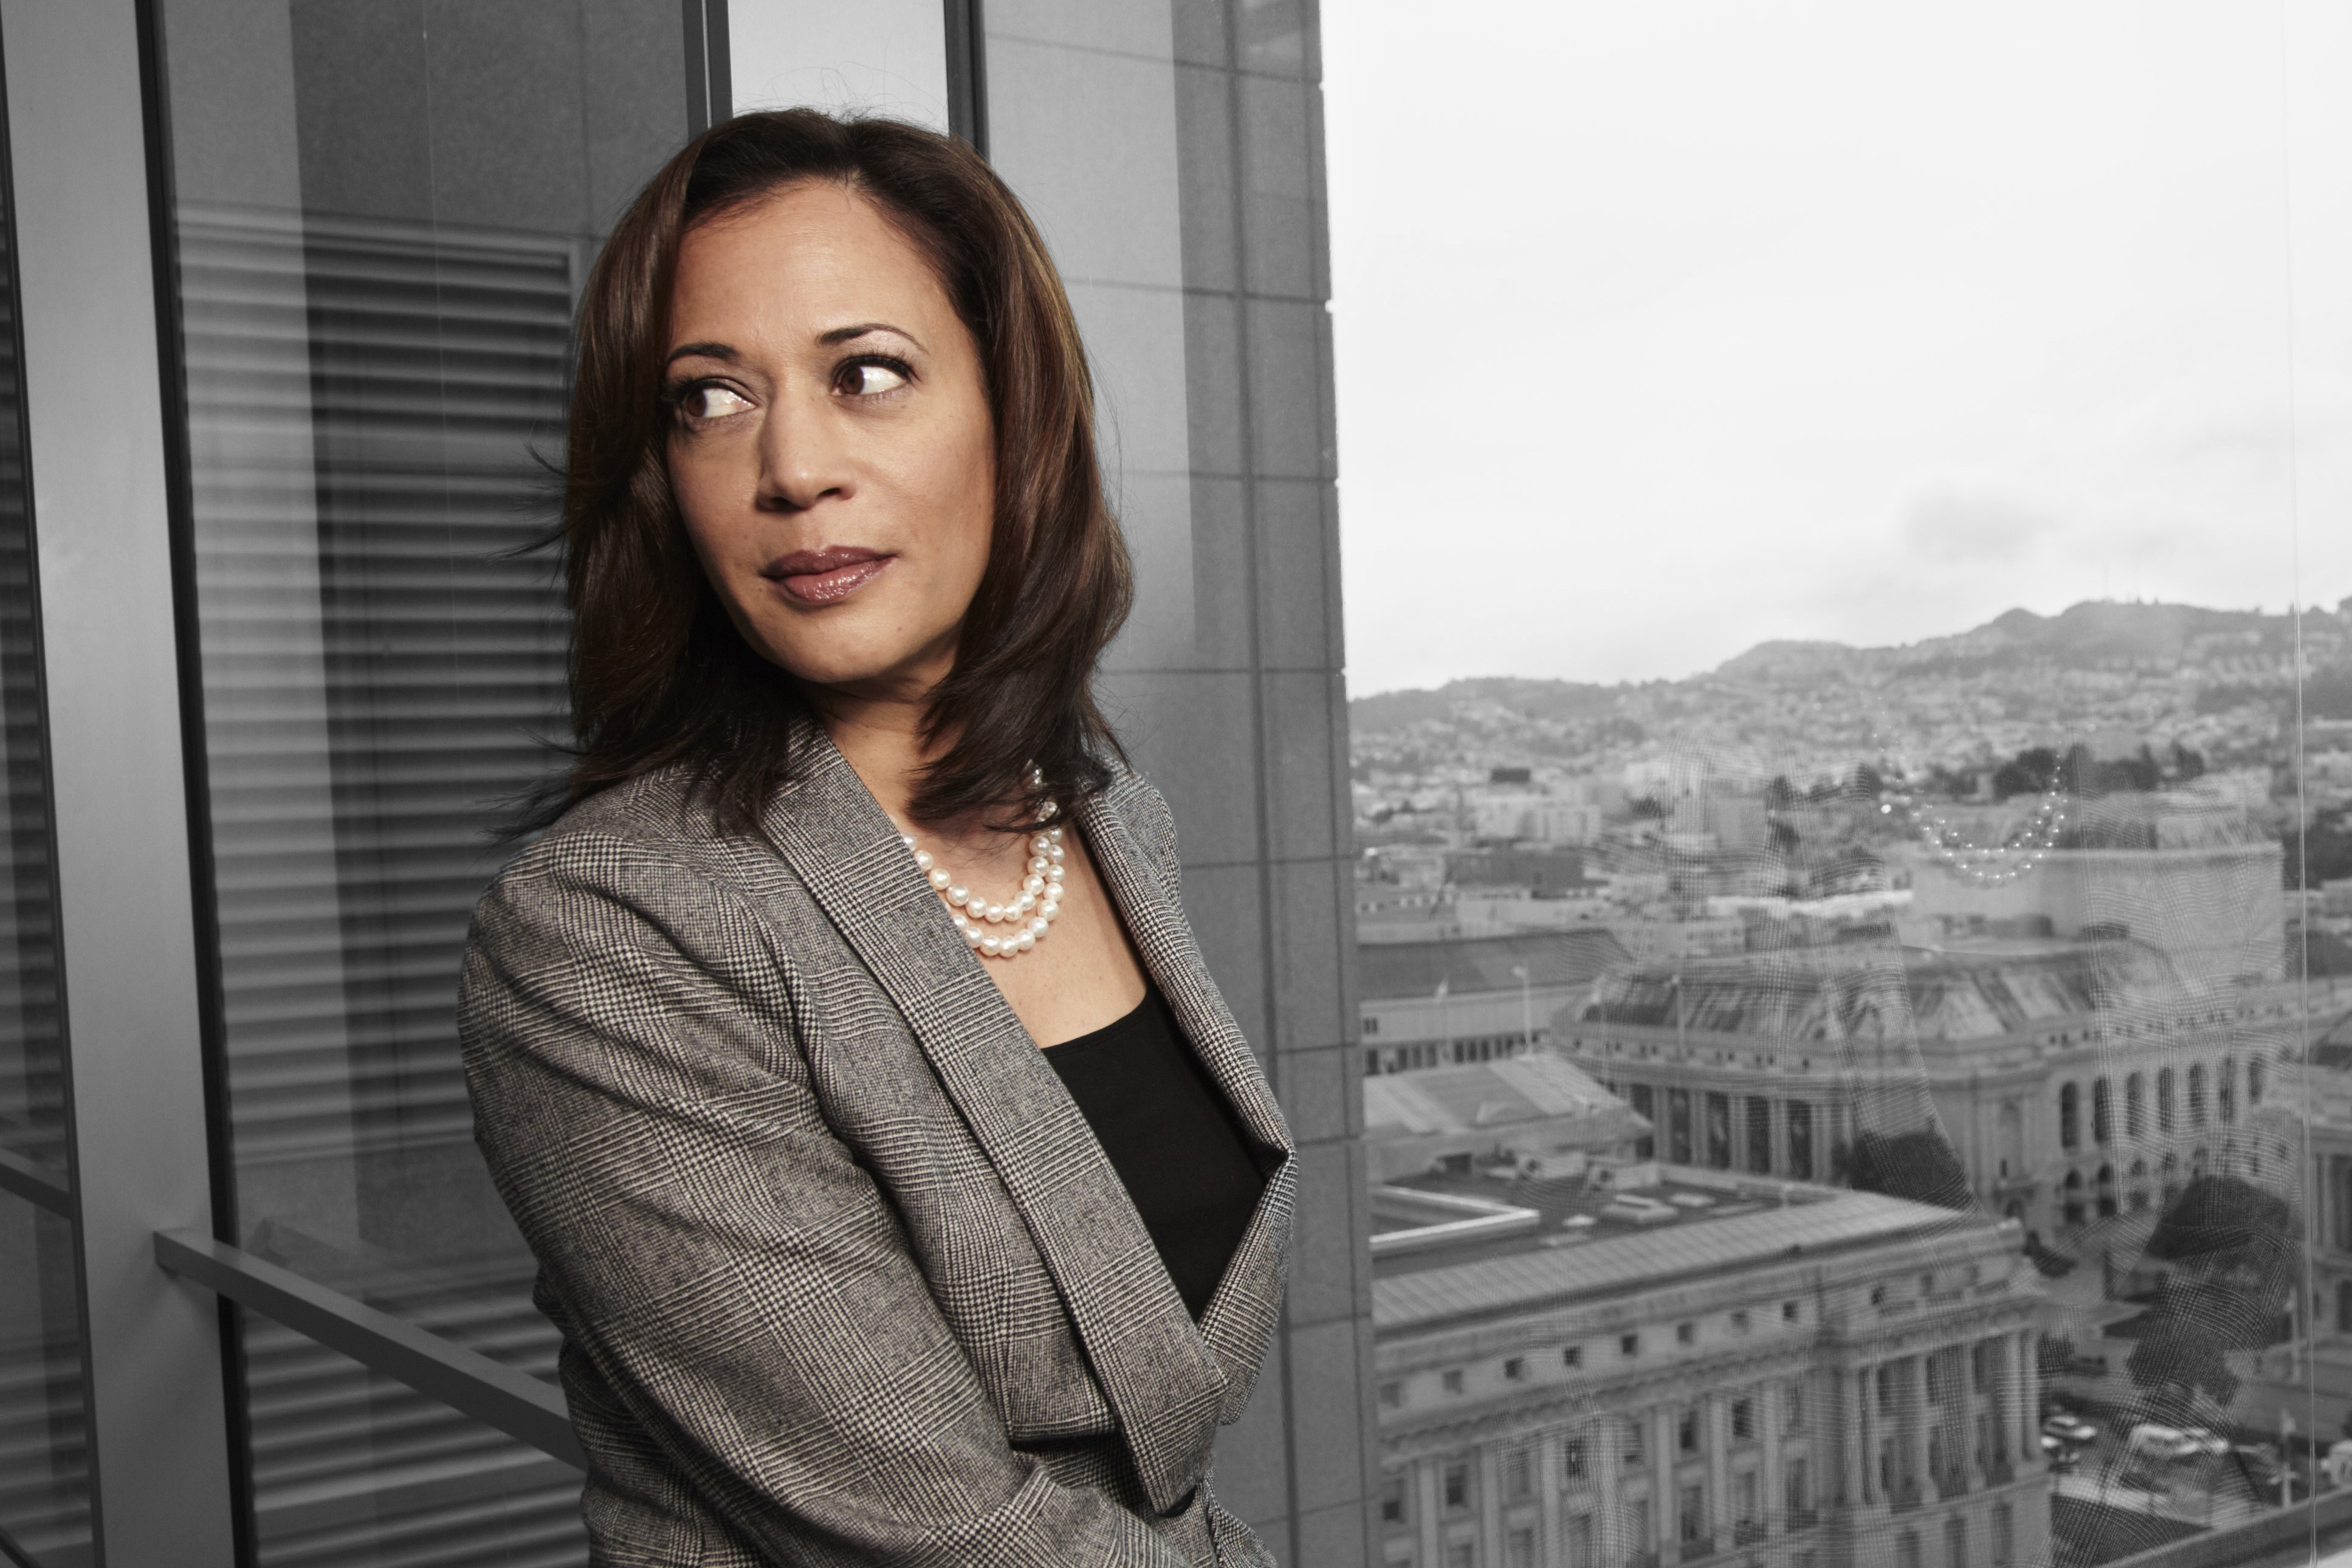 Kamala Harris: 
                              The California attorney general, a Democrat, is running for the seat being vacated by long-serving Sen. Barbara Boxer in California. If she wins, she would be the first black and the first South Asian Senator from the Golden State.